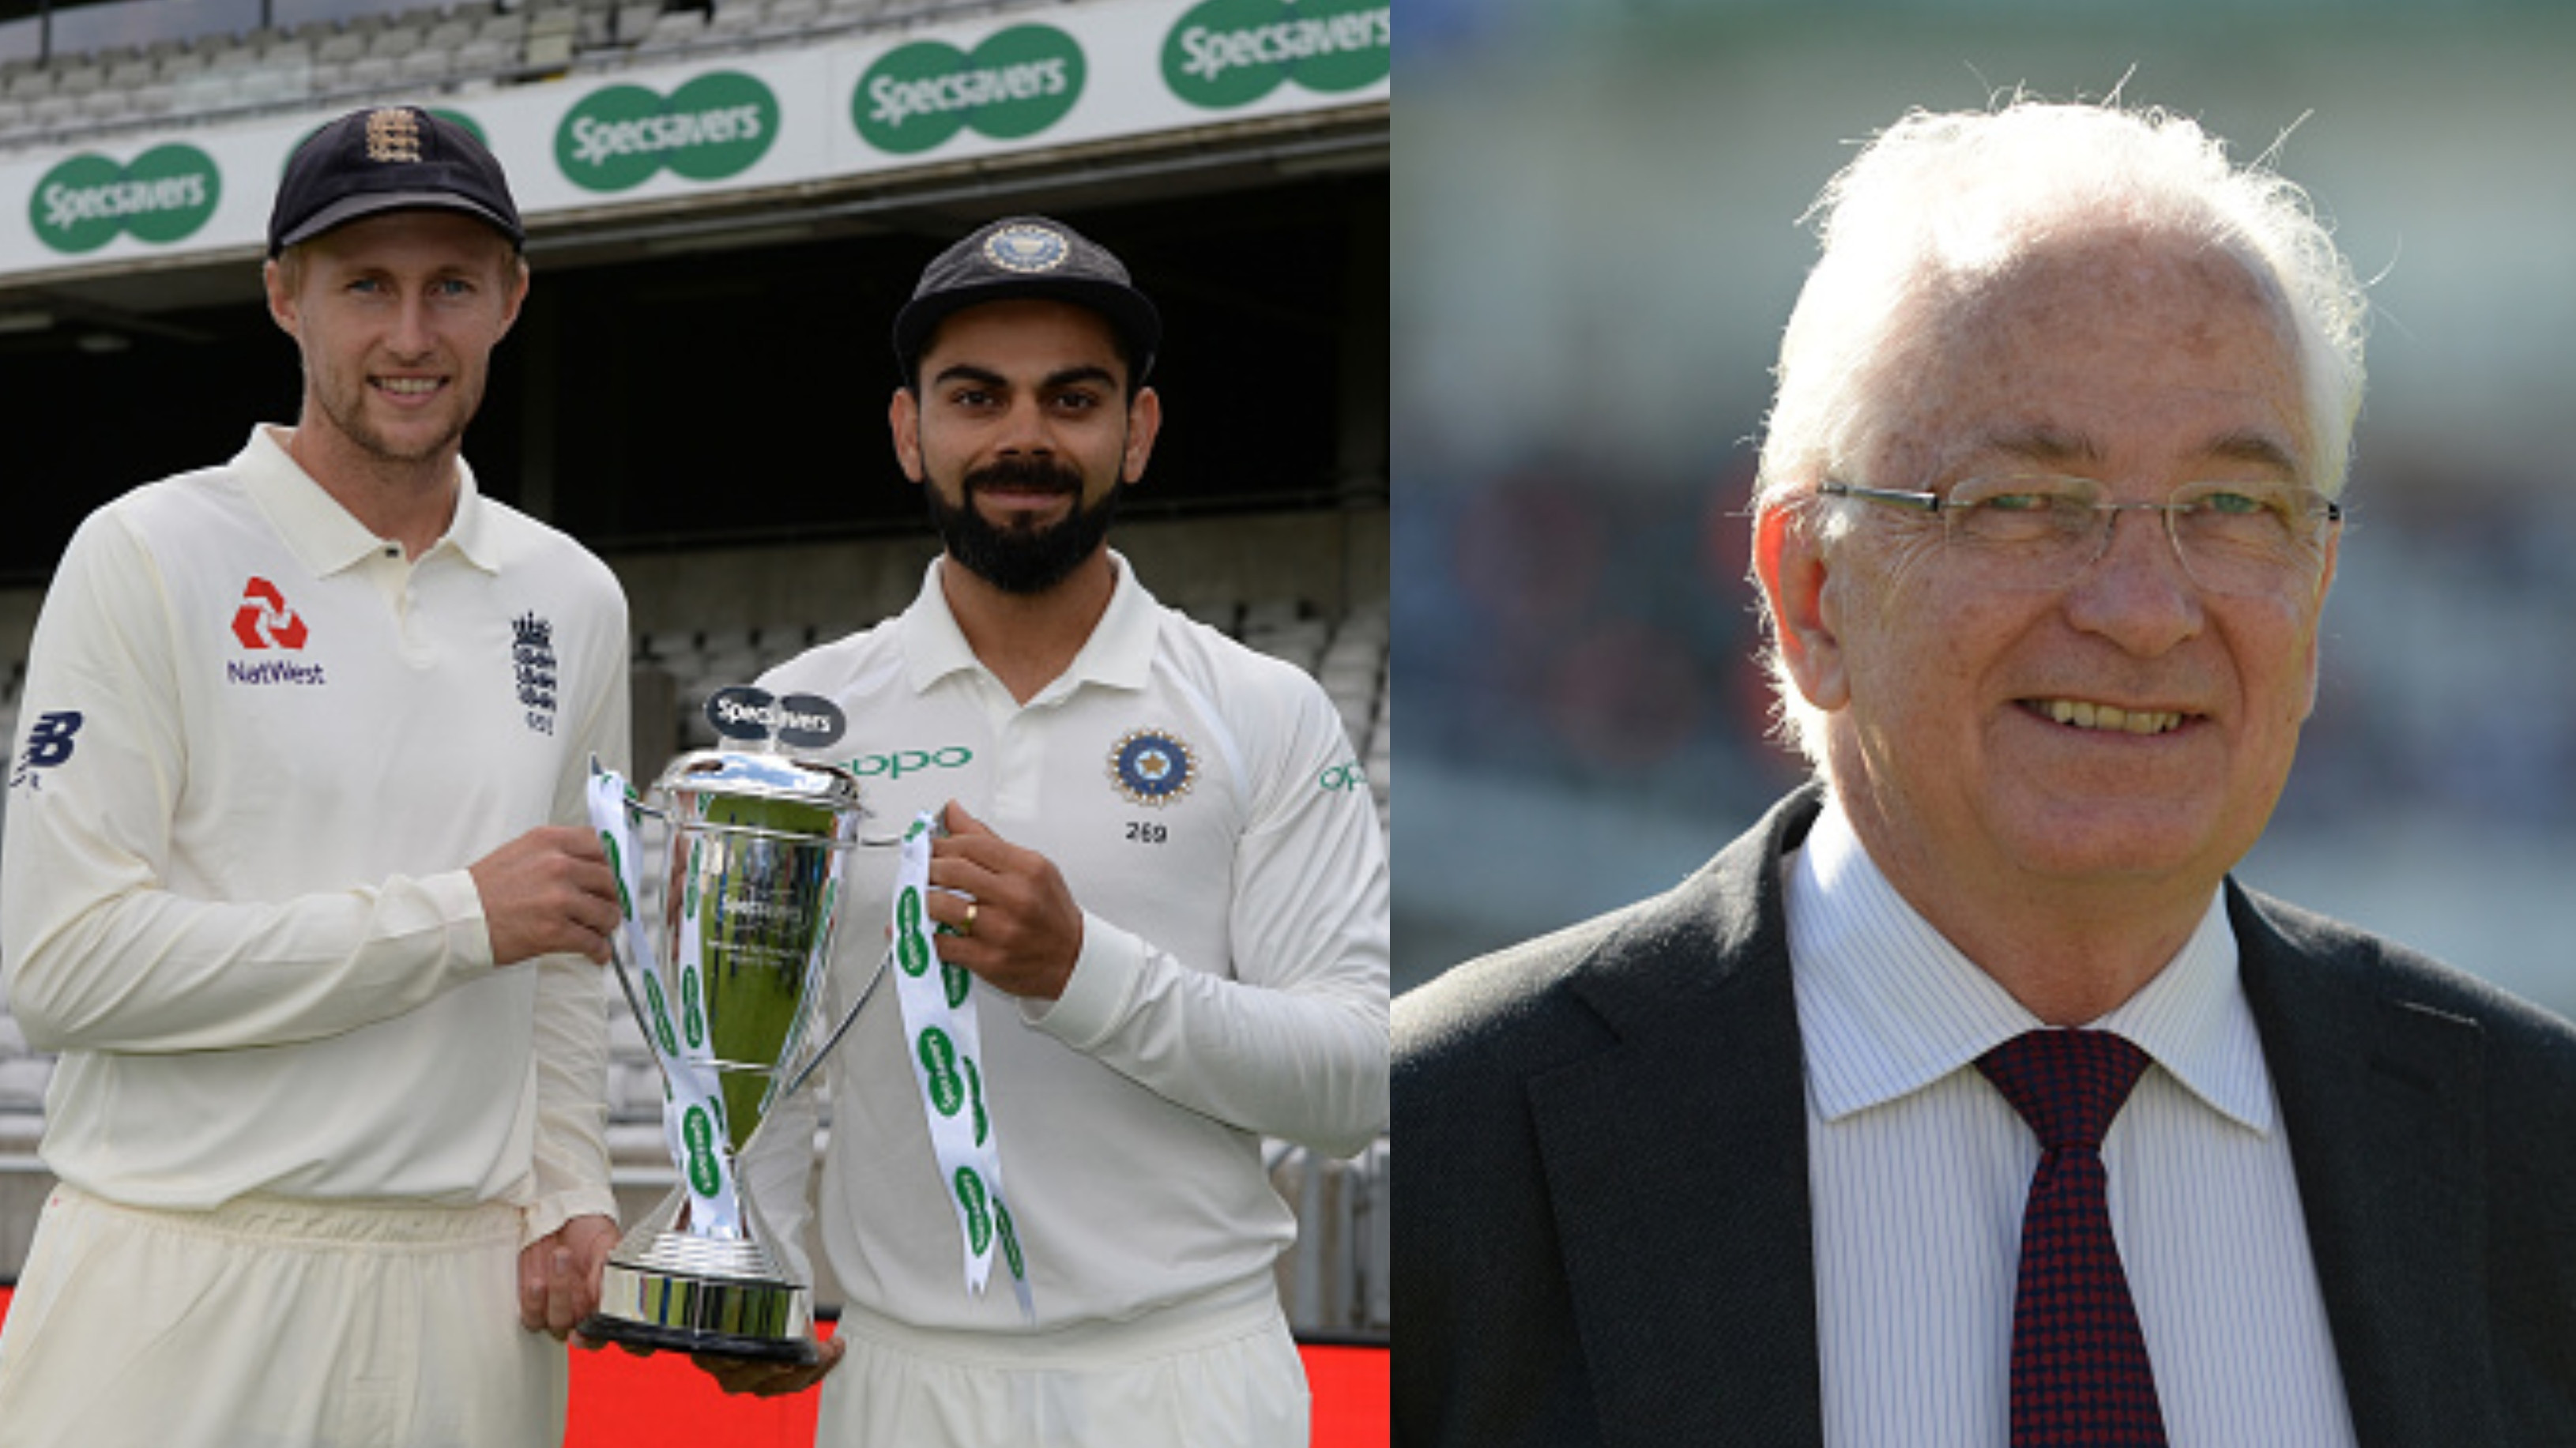 IND v ENG 2021: David Gower fears England's rotation policy could hurt their chances of winning in India